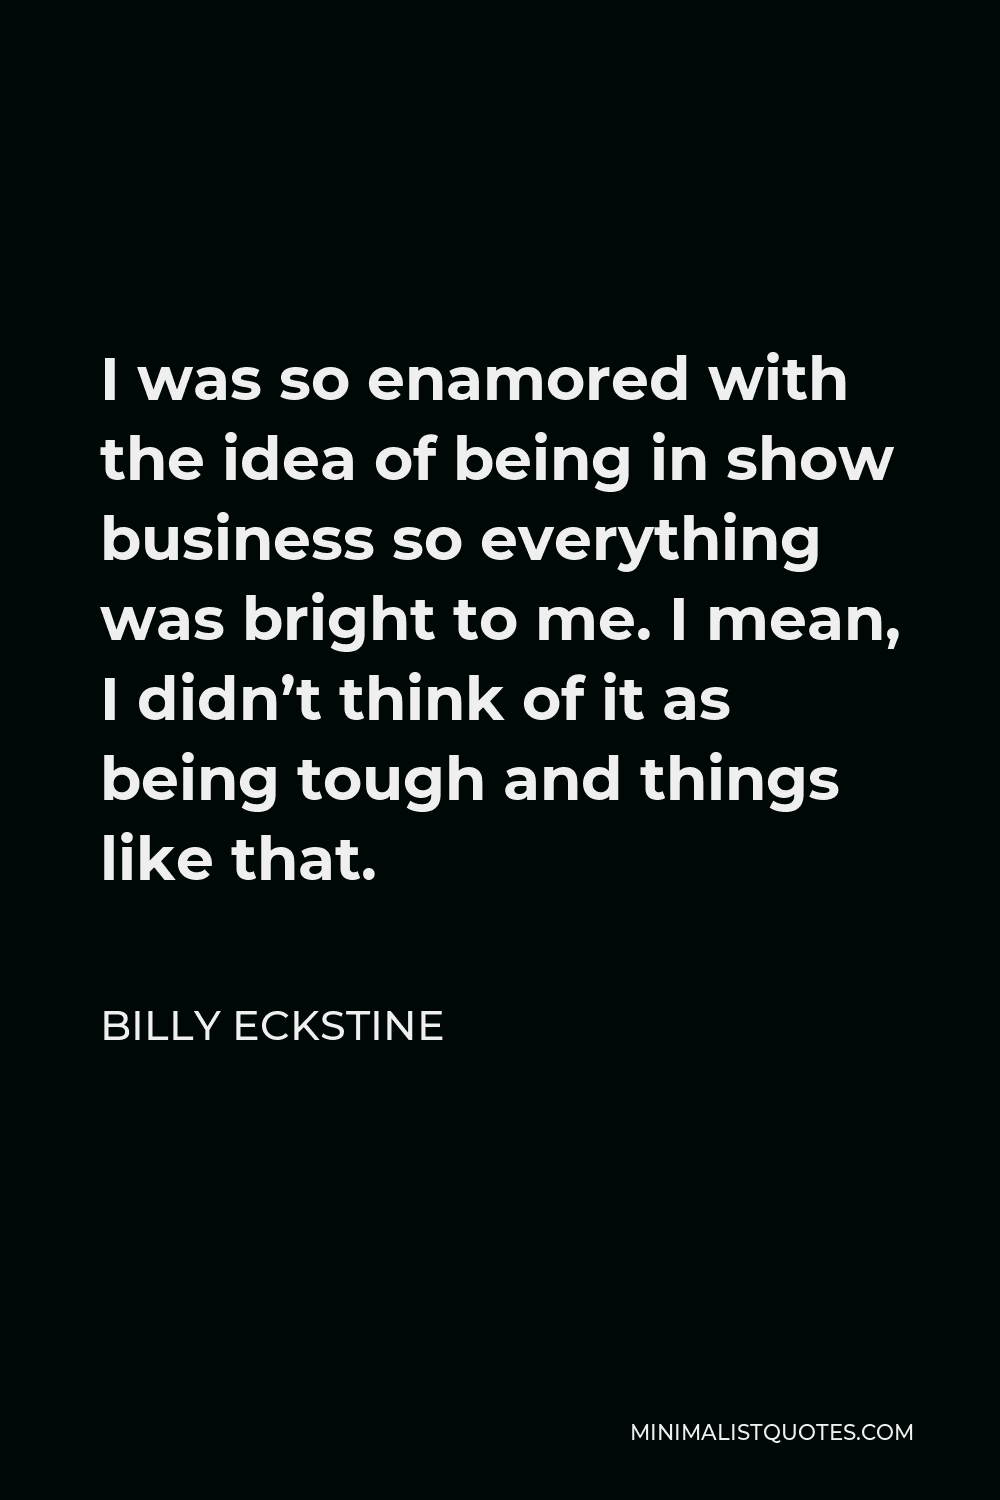 Billy Eckstine Quote - I was so enamored with the idea of being in show business so everything was bright to me. I mean, I didn’t think of it as being tough and things like that.